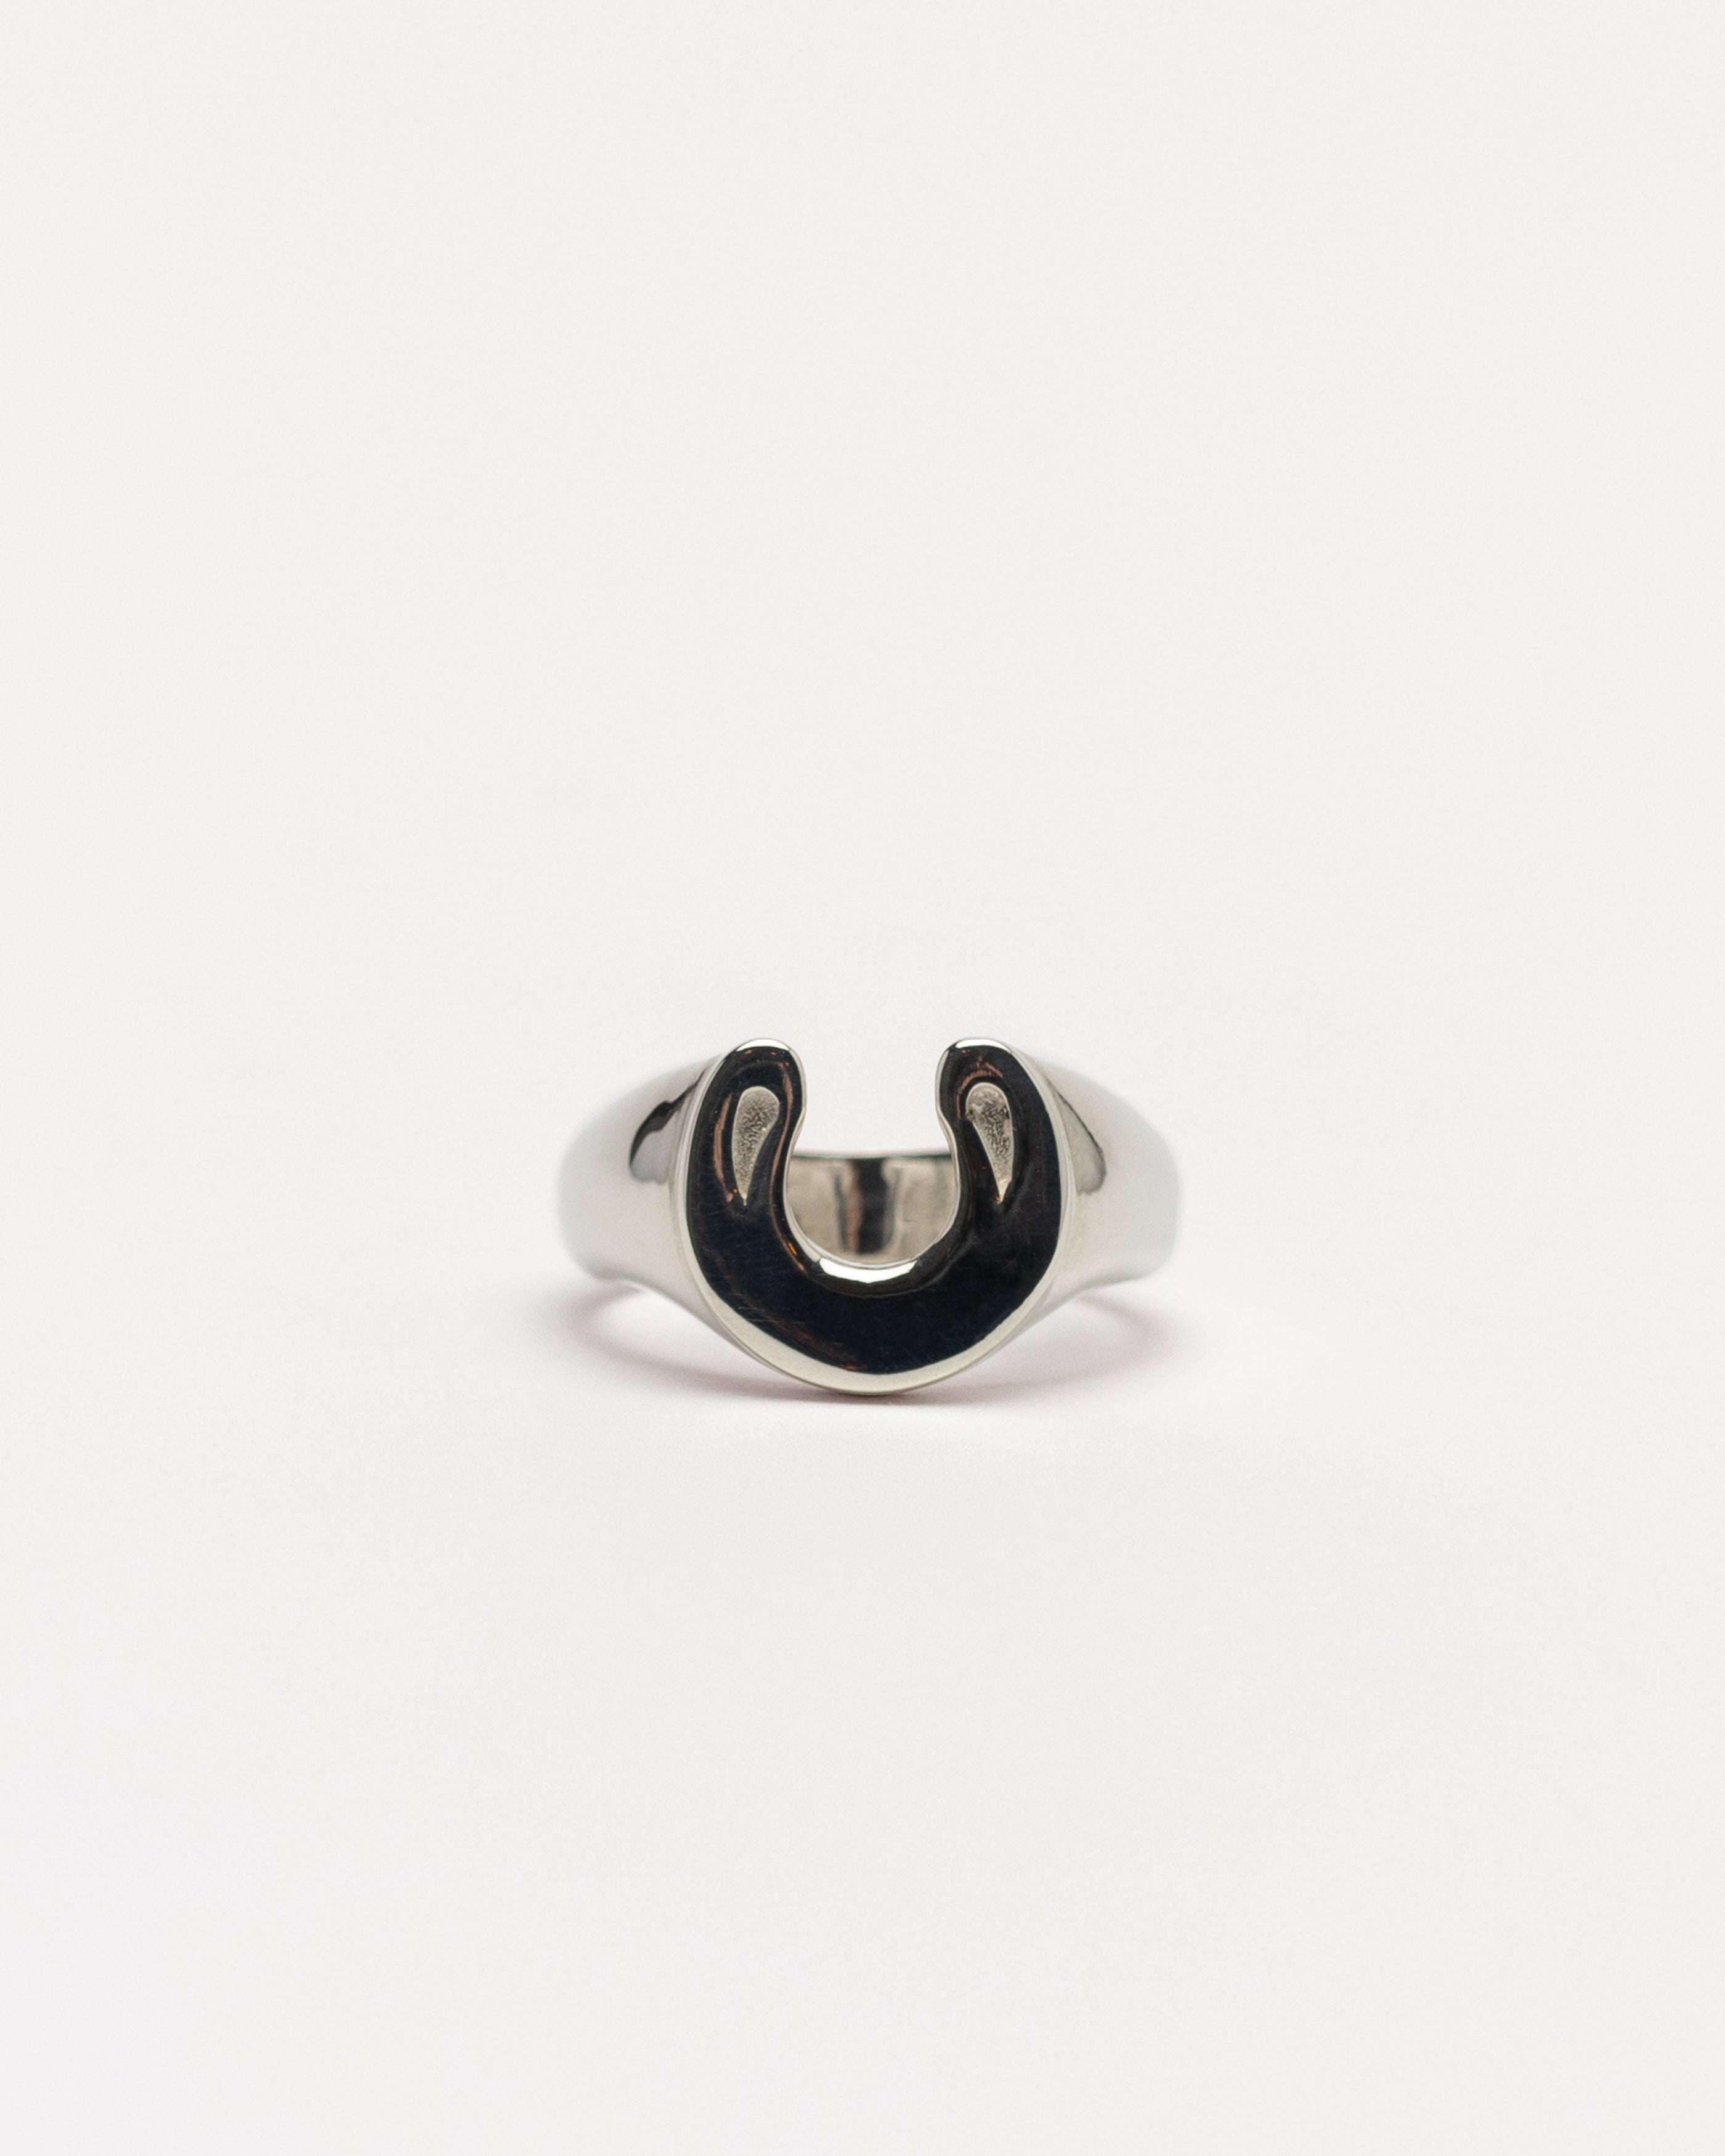 Horseshoe Ring in Silver